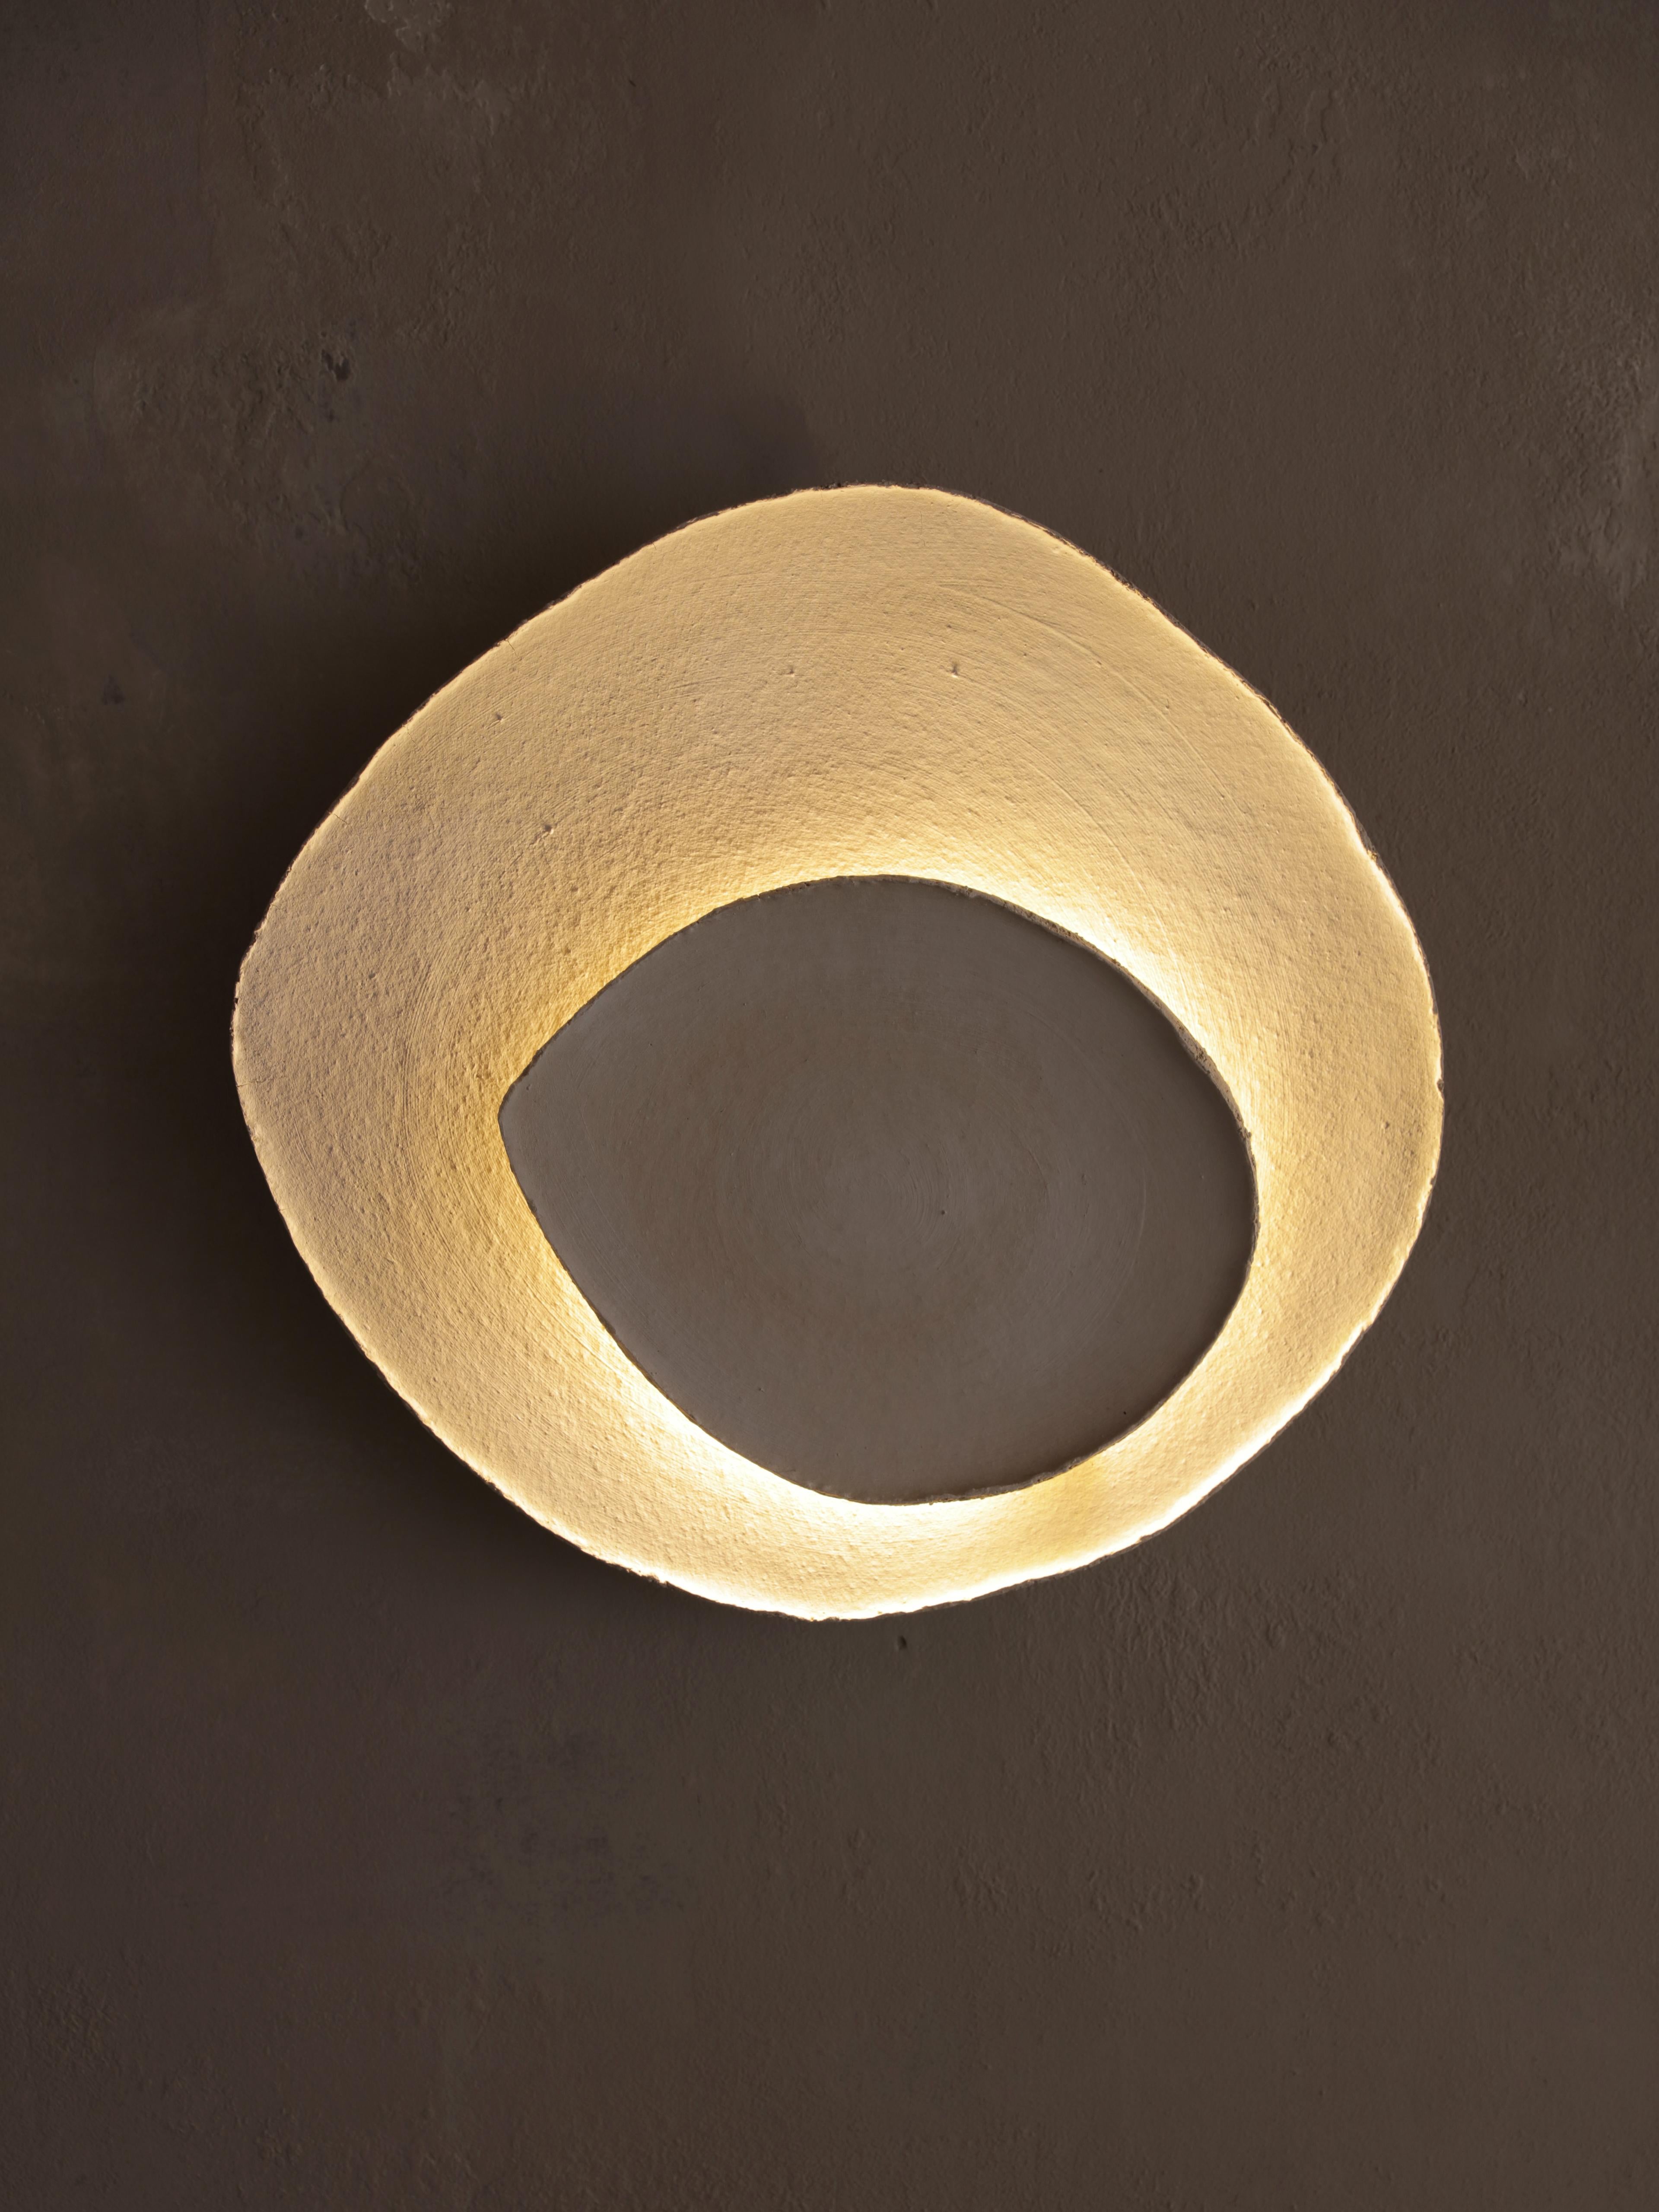 Bone #7 wall light by Margaux Leycuras
One of a Kind, Signed and numbered
Dimensions: D 6 x W 45 x H 42 cm 
Material: Ceramic, sand stoneware tops with a porcelain engobe finish.
The piece is signed, numbered and delivered with a certificate of